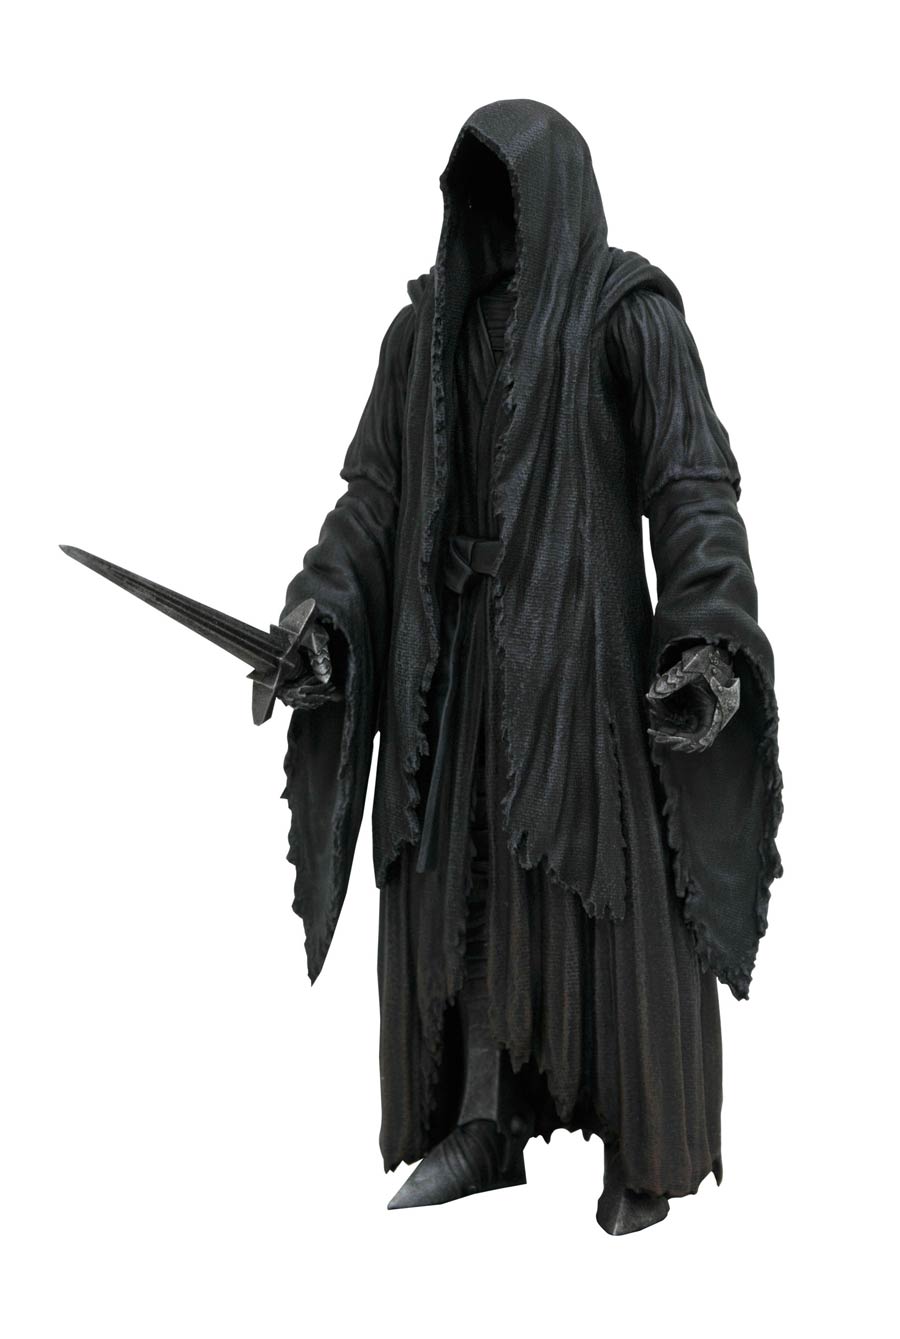 Lord Of The Rings Action Figure Series 2 - Nazgul